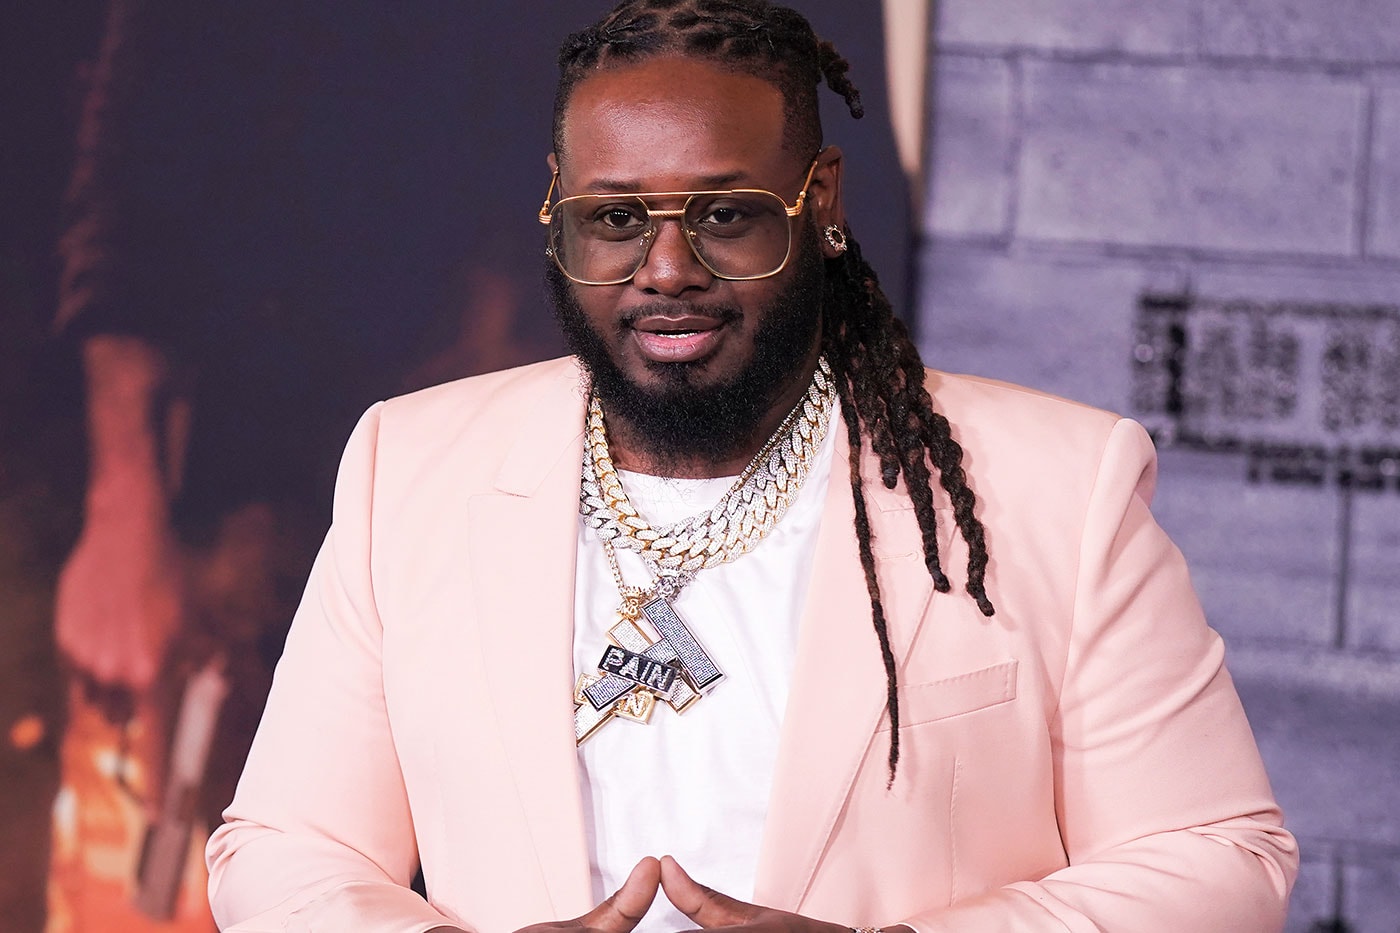 T-Pain Says Young Artists' Constant Need for "Momentary Popularity" Is Disturbing rappers hip hop longevity twitter